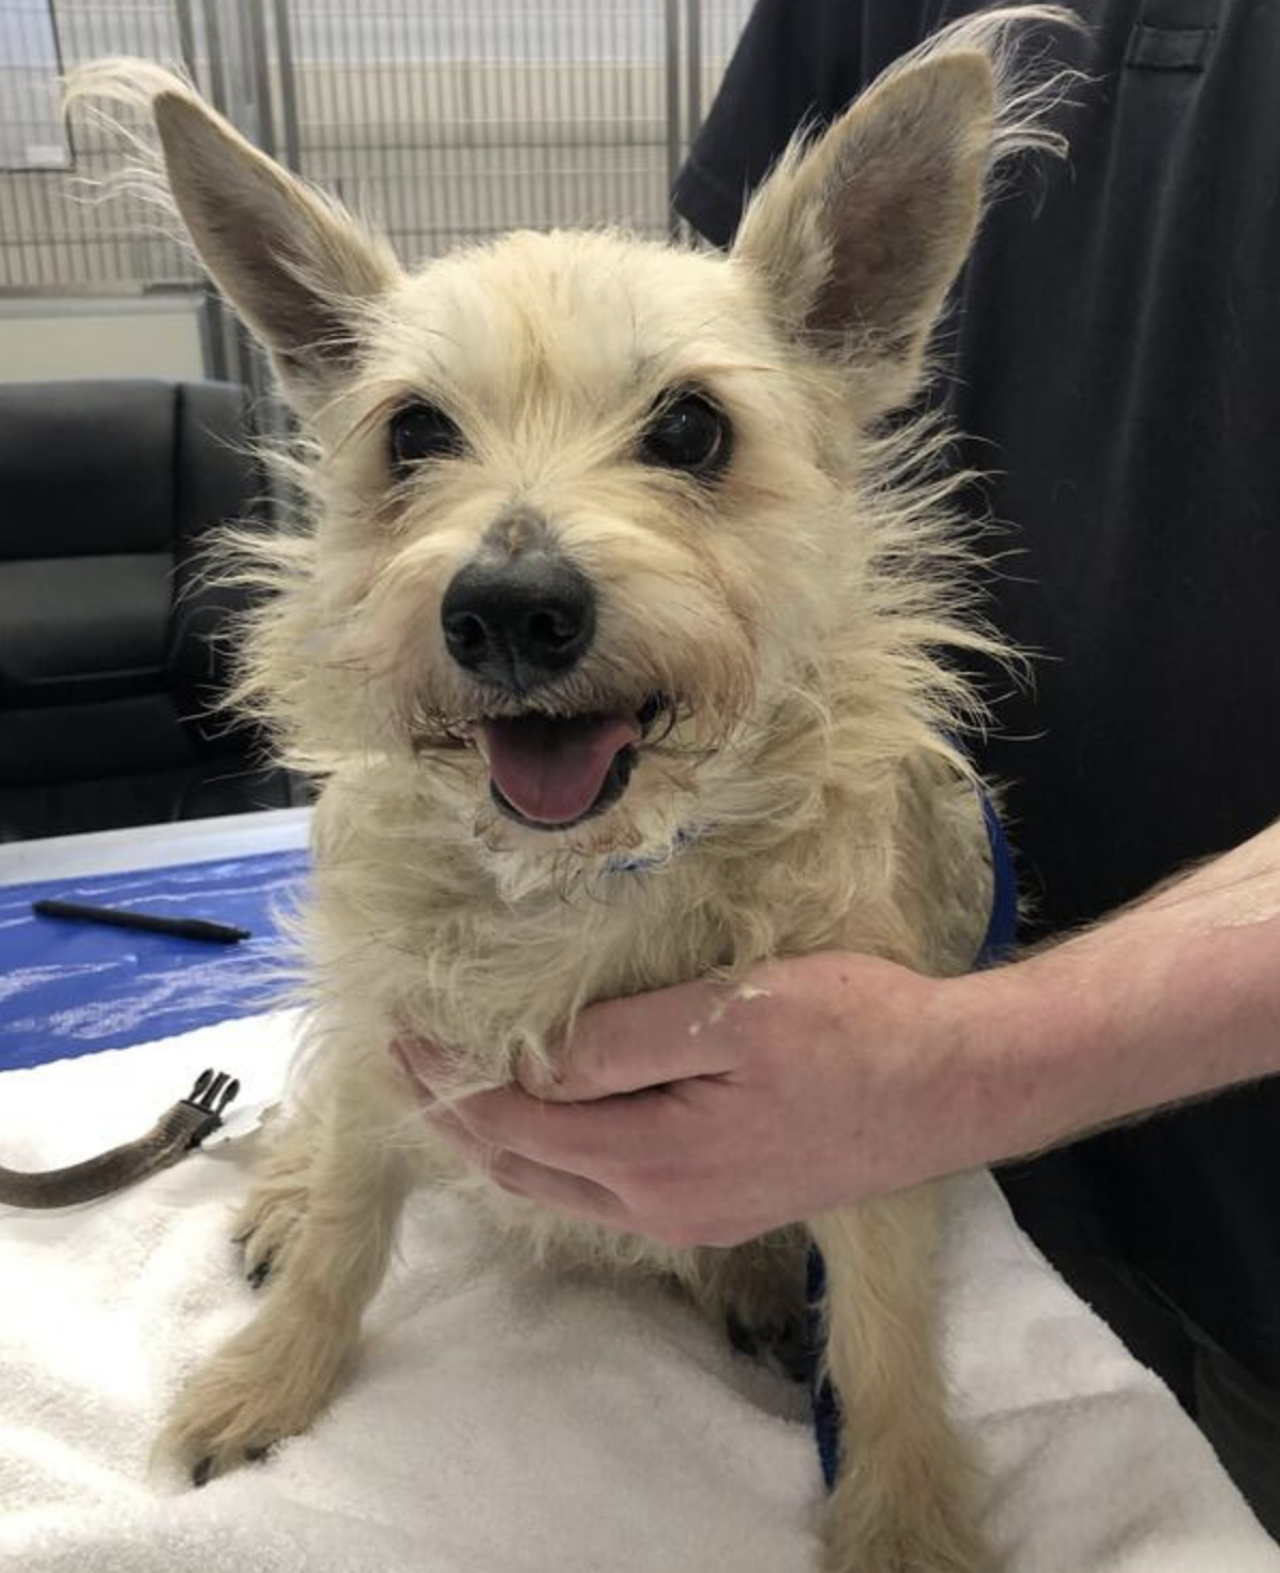 Sassy
Age: 7 years old / Breed: Terrier Cross / Sex: Female
Sassy is a fluffy little terrier mix who is healthy, up-to-date on her vaccines and spayed.